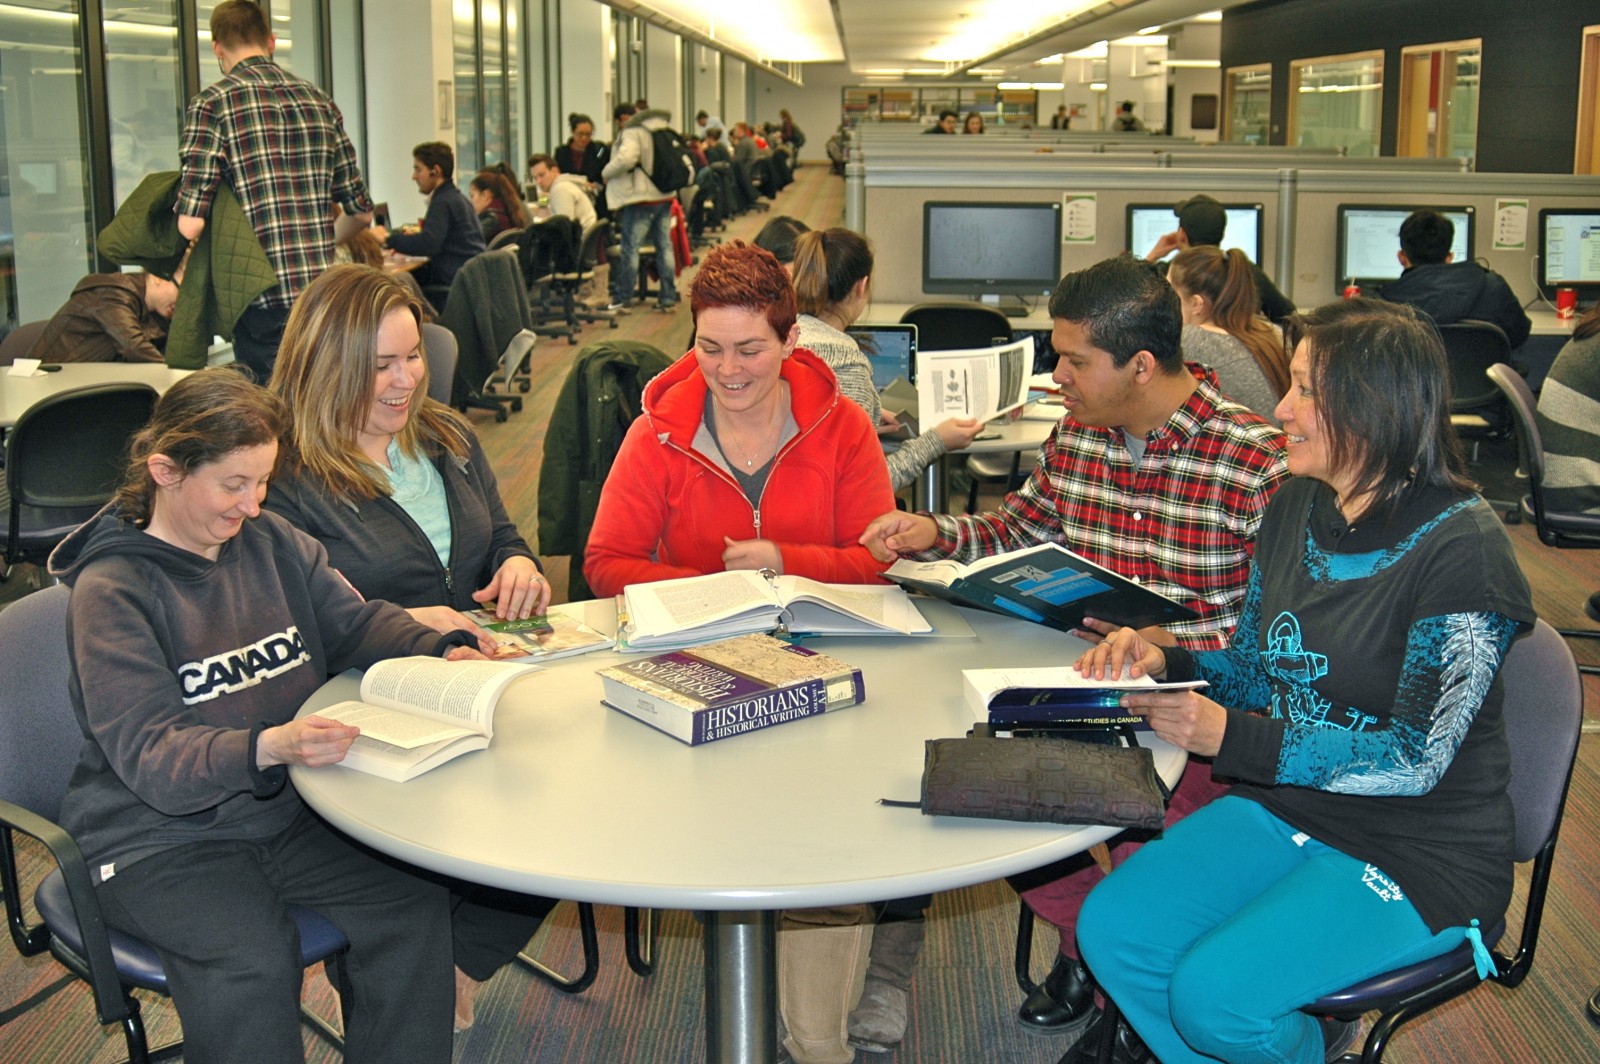 Hitting the books in Brock's Matheson Learning Commons: From left, Jennifer Nixon, Toronto (Mohawk nation) who is studying Film Studies; Jody General, Ohsweken (Mohawk), in Business Administration; Terra Wott, St Catharines (Mi'kmaq), double major honours Psychology and Women’s and Gender Studies; Ryan H. Wijesirigunawardenae, Niagara (Dene), Medical Sciences with minors in Labour Studies, Biology, Physics; and Beverly Bannon, Anemki-wajiw (Thunder Mountain) (Ojibway), Master’s in Education Curriculum Development with minor in Aboriginal Studies.